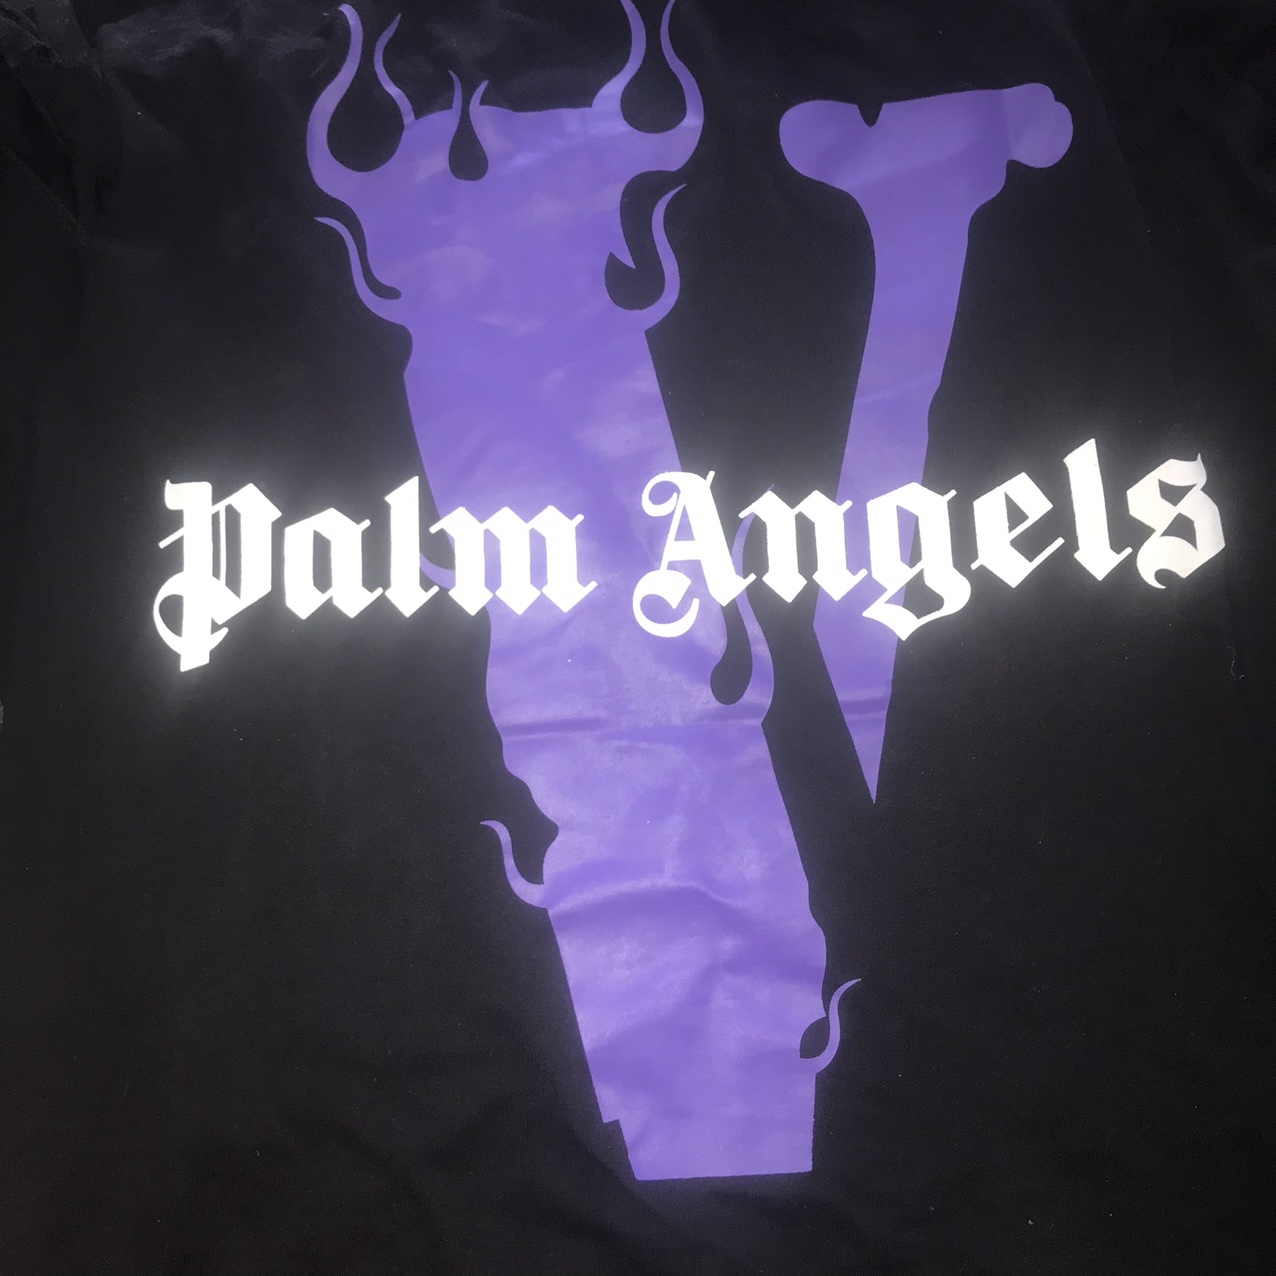 Palm angels X Vlone Medium size tee. Real and